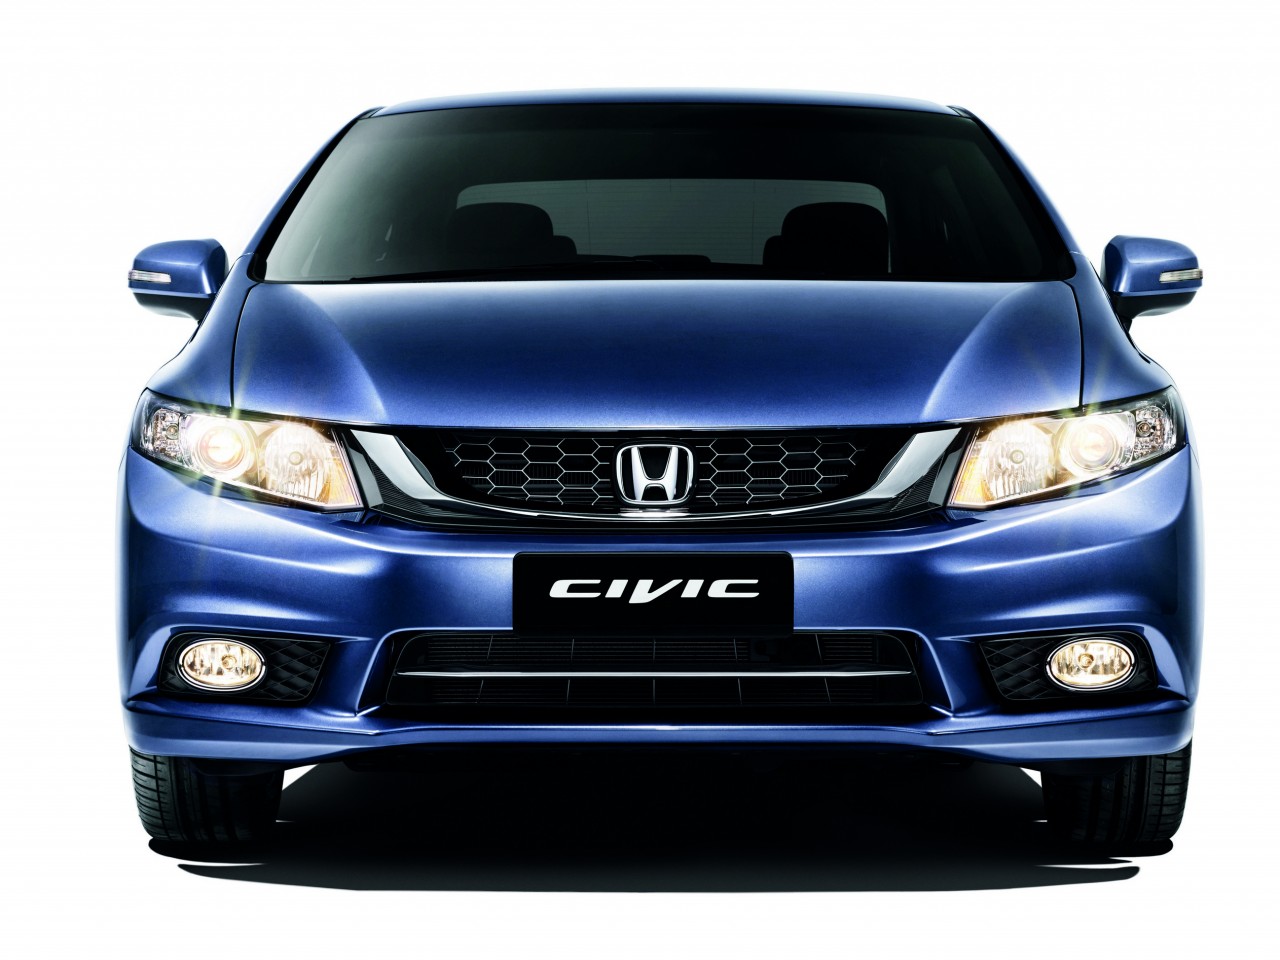 The New Civic with newly enhanced front grille design and lower grille assembly.